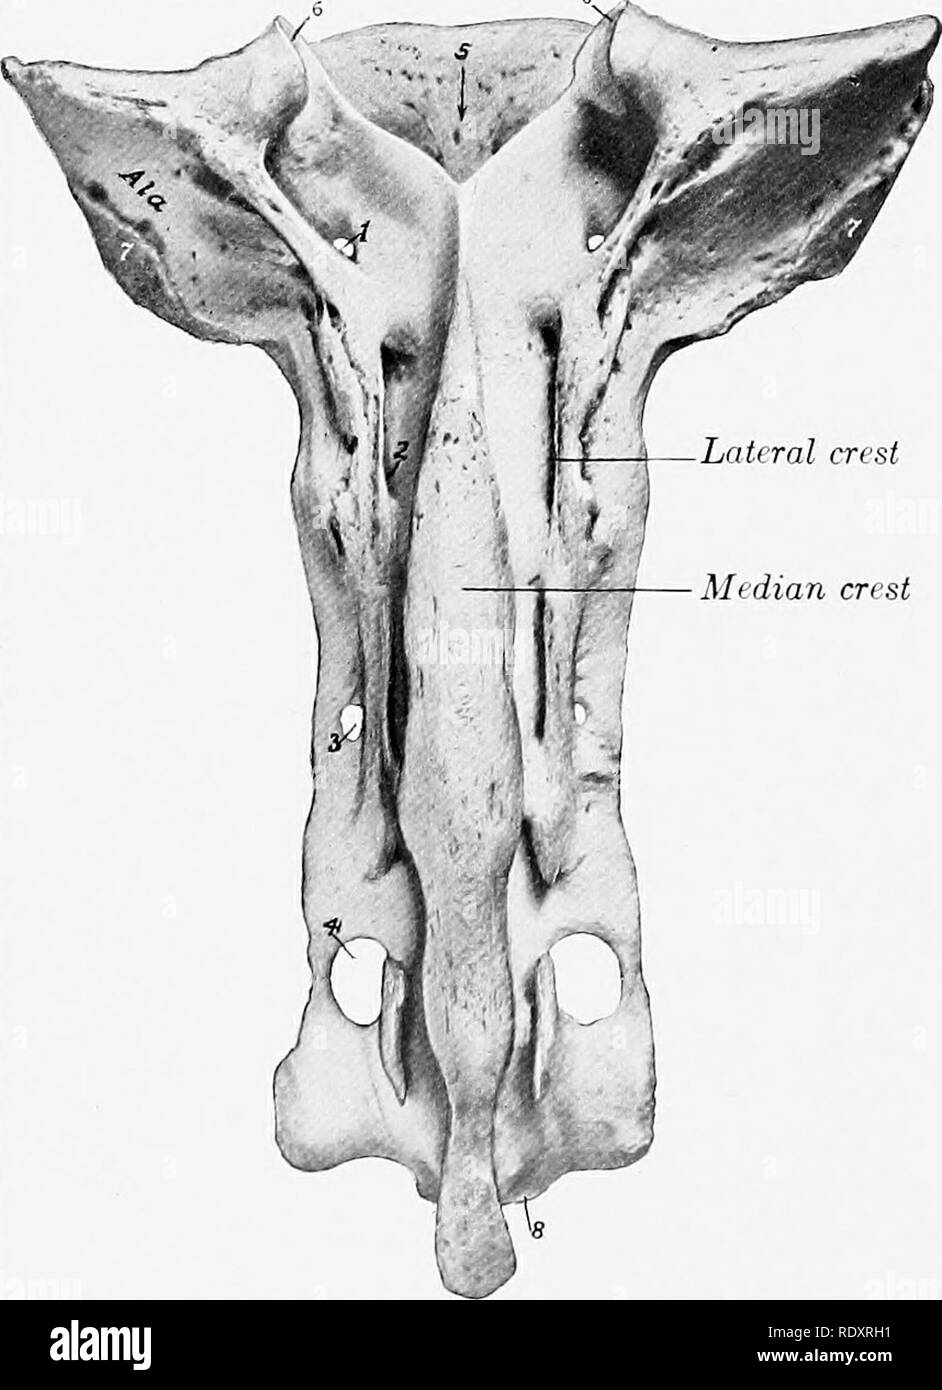 . The anatomy of the domestic animals . Veterinary anatomy. FiG. 124.—Fourth Lumbar Vertebra of Ox; Posterior View. 1, Cavity of posterior end of body; 2, notch of arcli; 3, 4, articular processes; 5, spinous process; 6, transverse process. Mtdian crest ess is thick and strong, and bears a rounded mammillary process (except at the posterior end of the series); the last two, although prominent, do not always articu- late with the ribs. The spinous process is long. The first is much higher than in the horse, the next two are usu- ally the most prominent, and be- hind this there is a very gradual Stock Photo